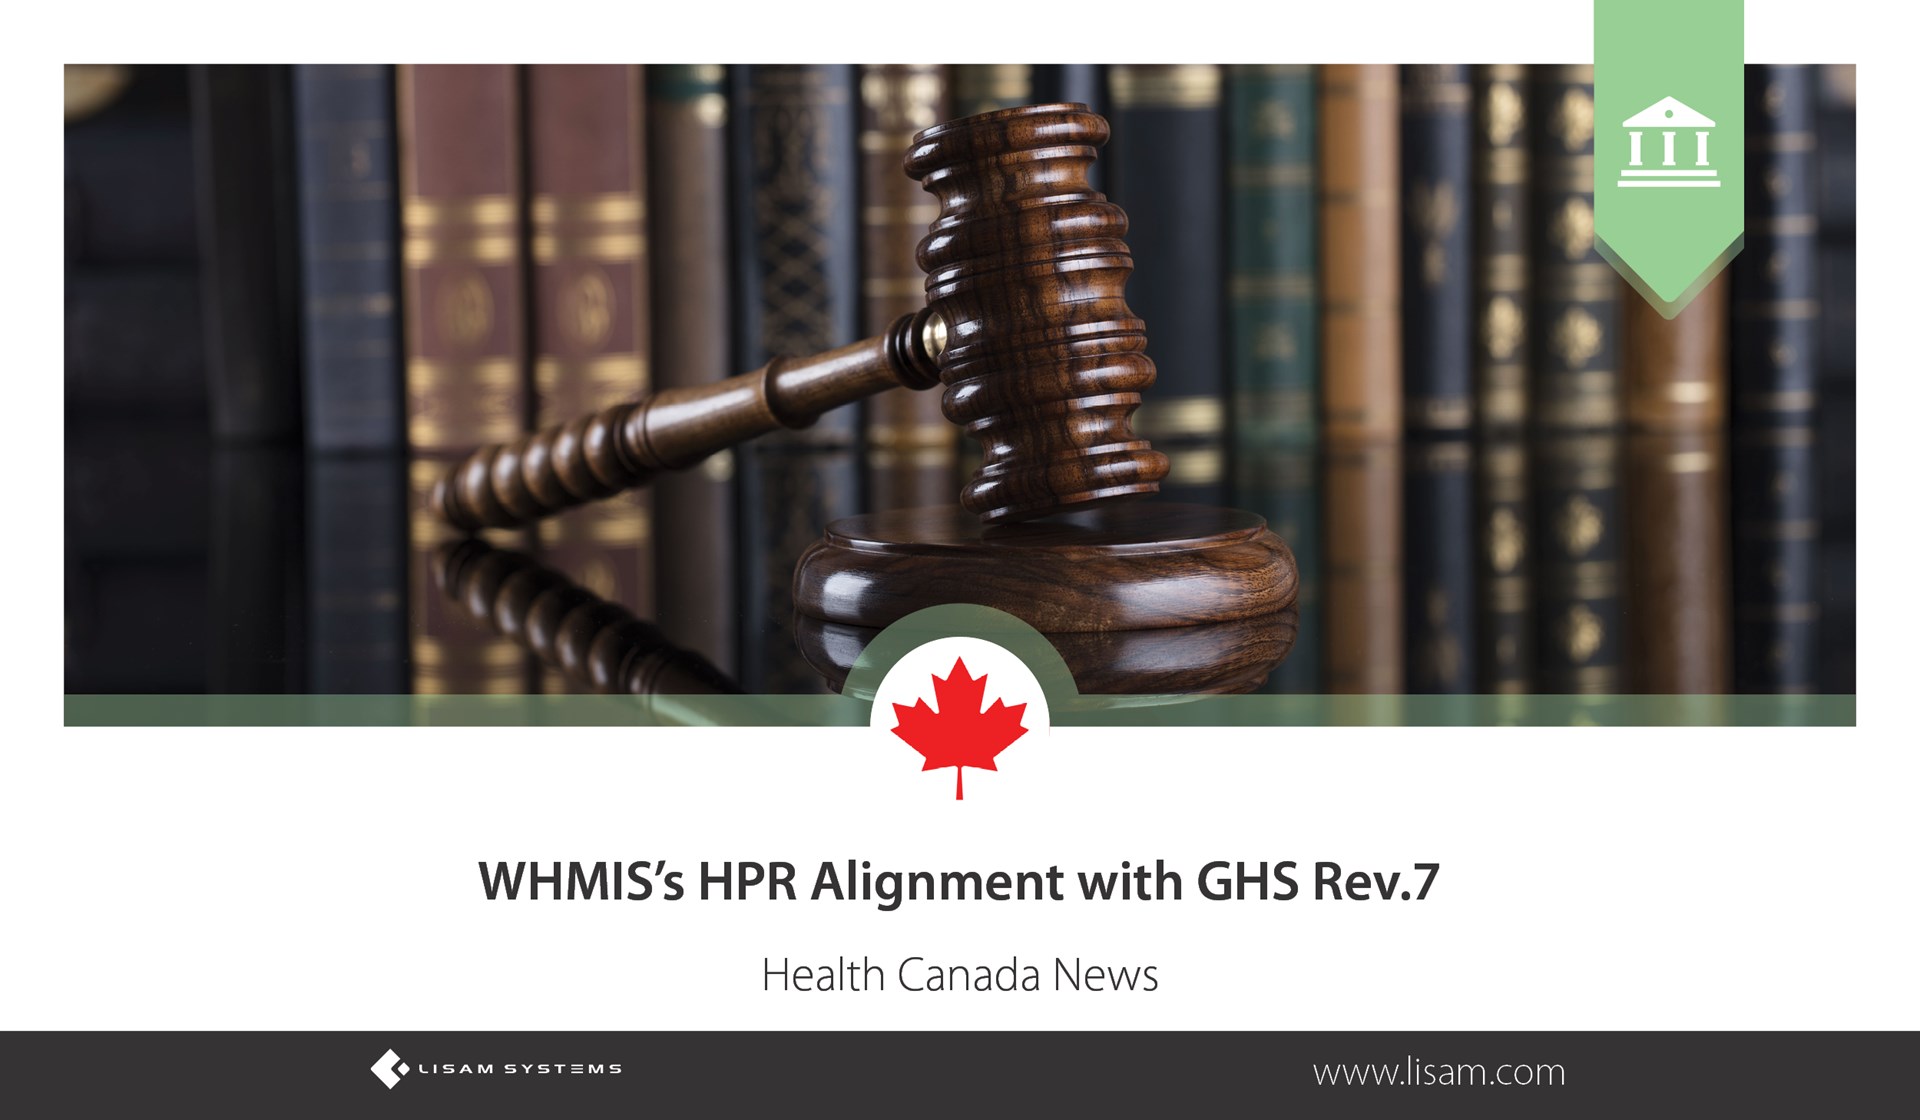 WHMIS HPR alignment with rev 7